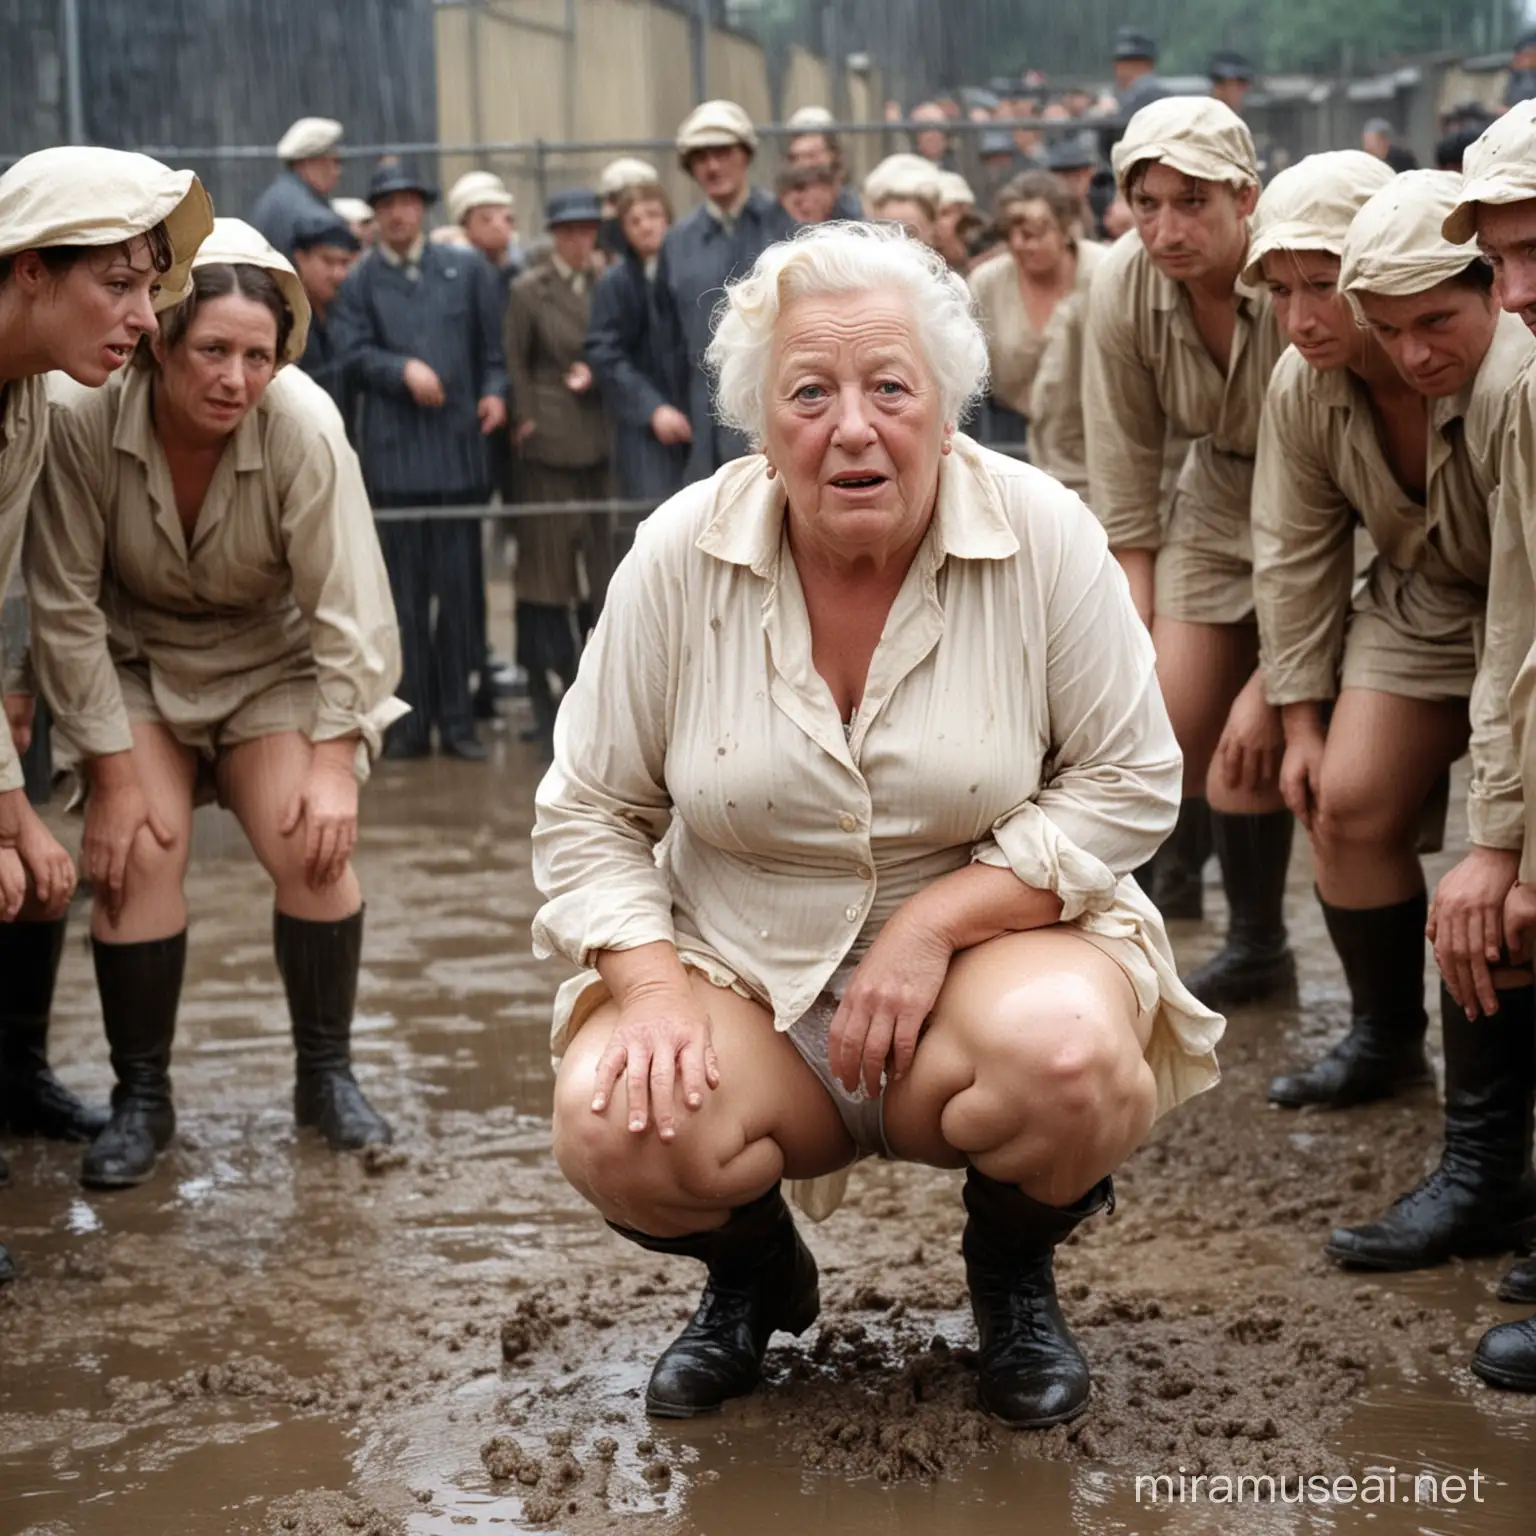 Margaret Rutherford Squatting in Muddy Prison Camp Under Rain Watched by Guards